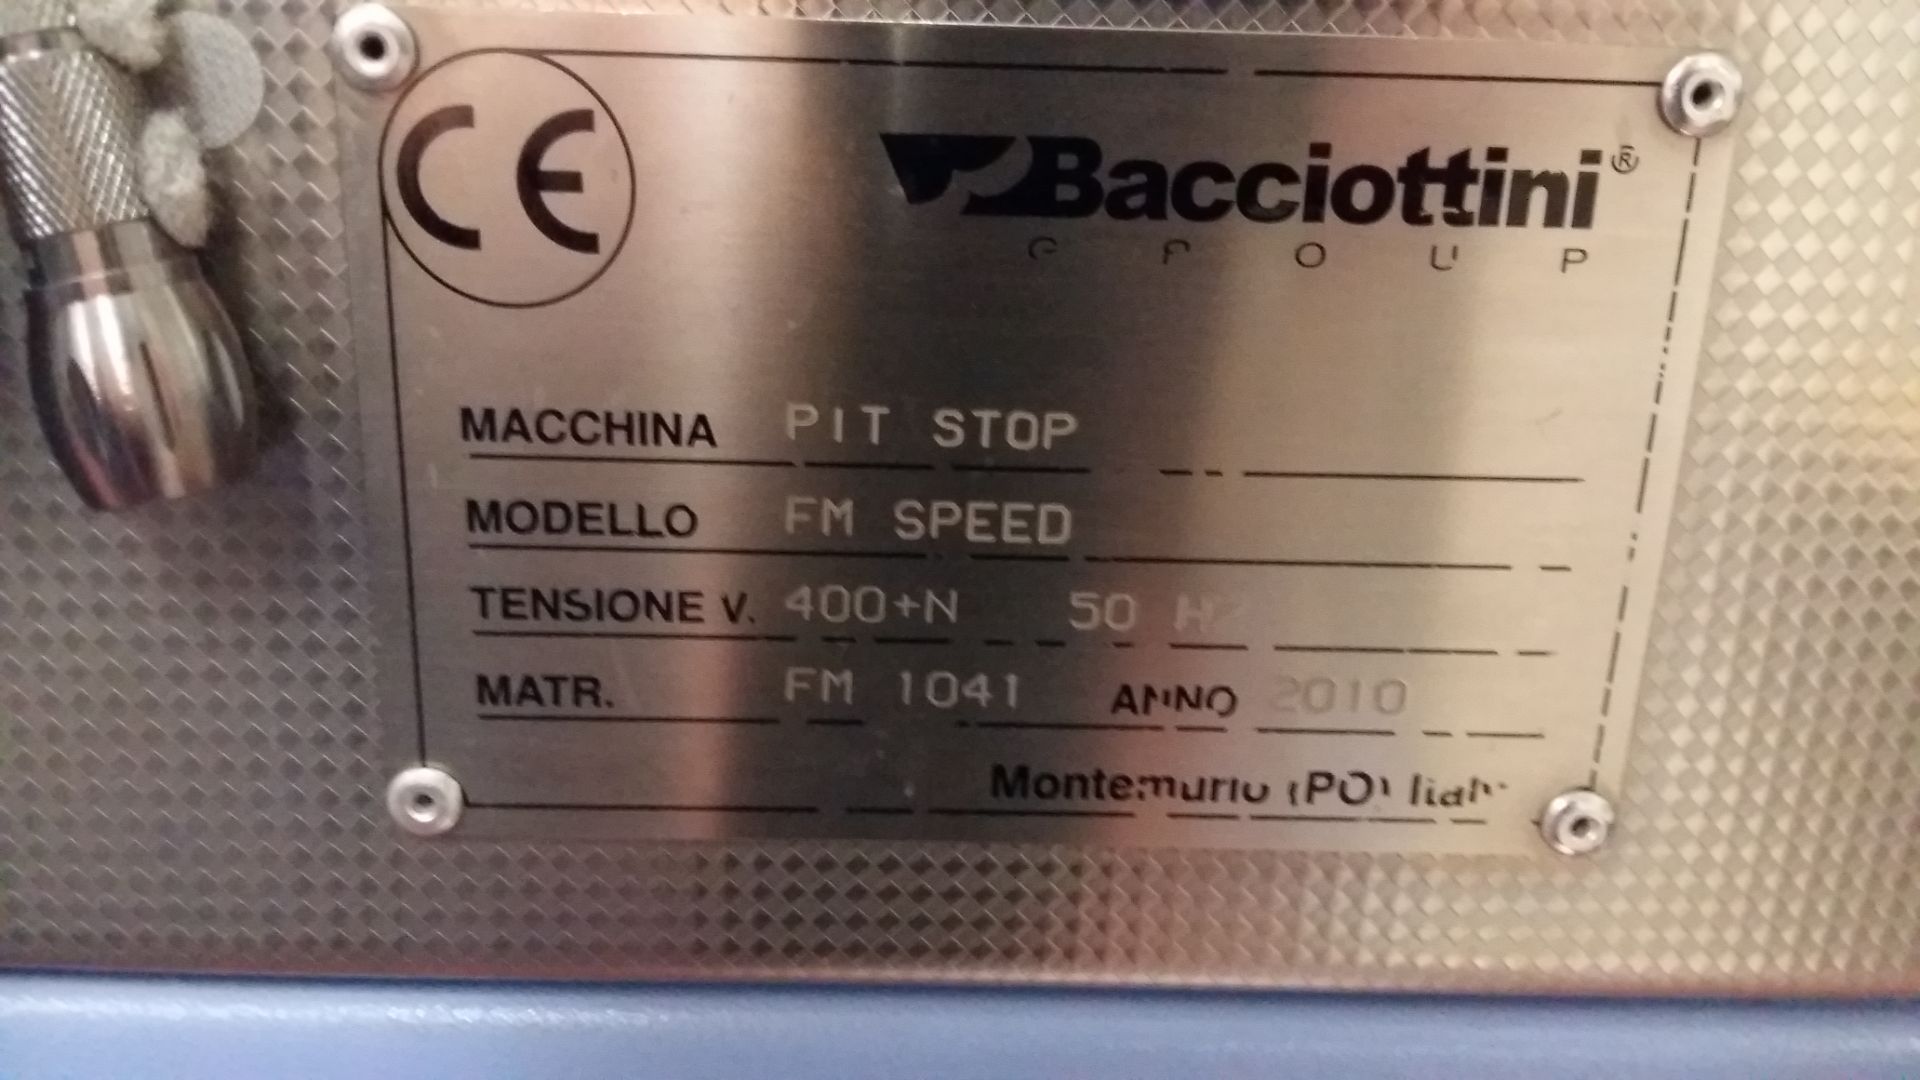 Bacciottini Pit Stop FM speed creaser and perforator - Image 5 of 6